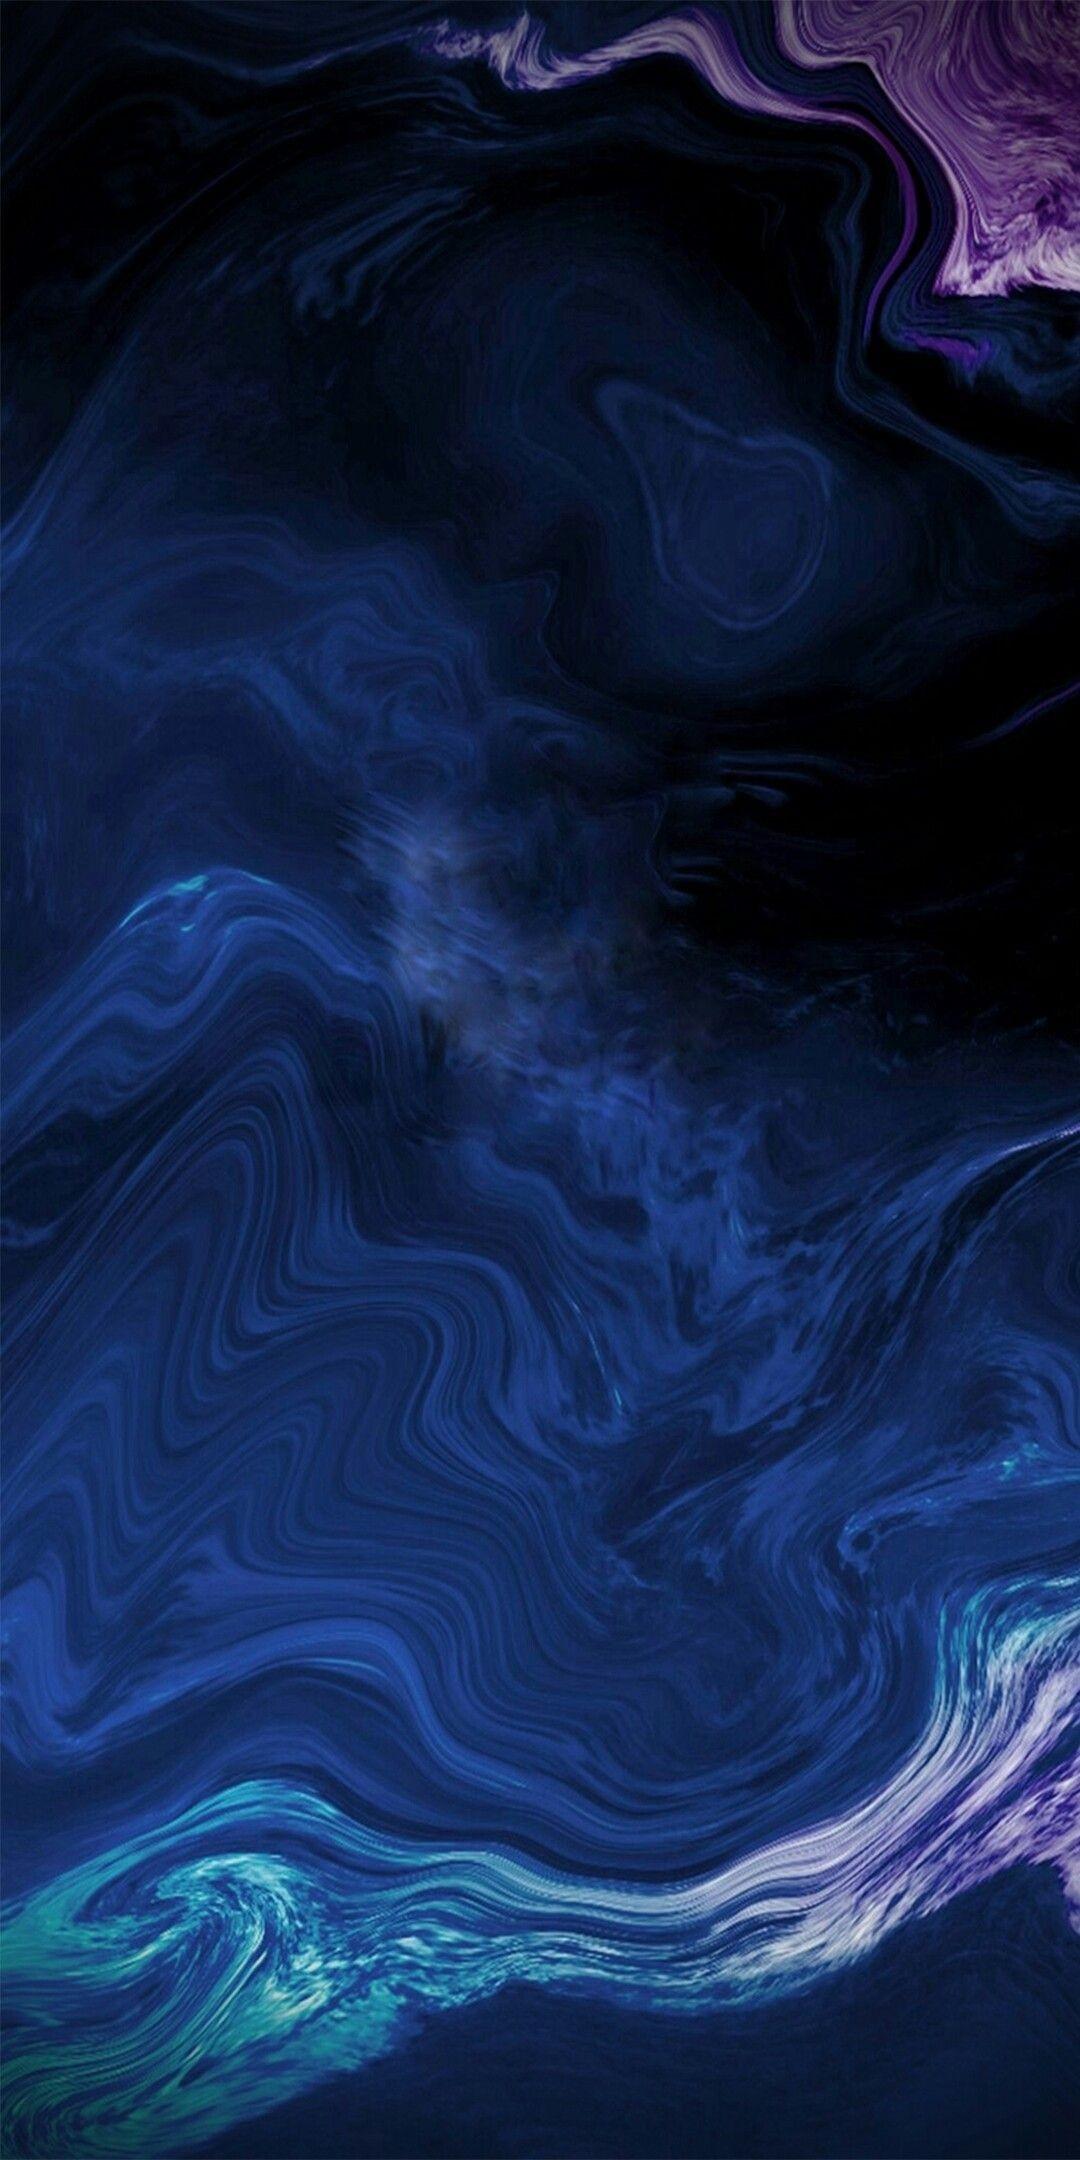 Live Wallpaper S8 Edge The Galleries Of HD Wallpaper